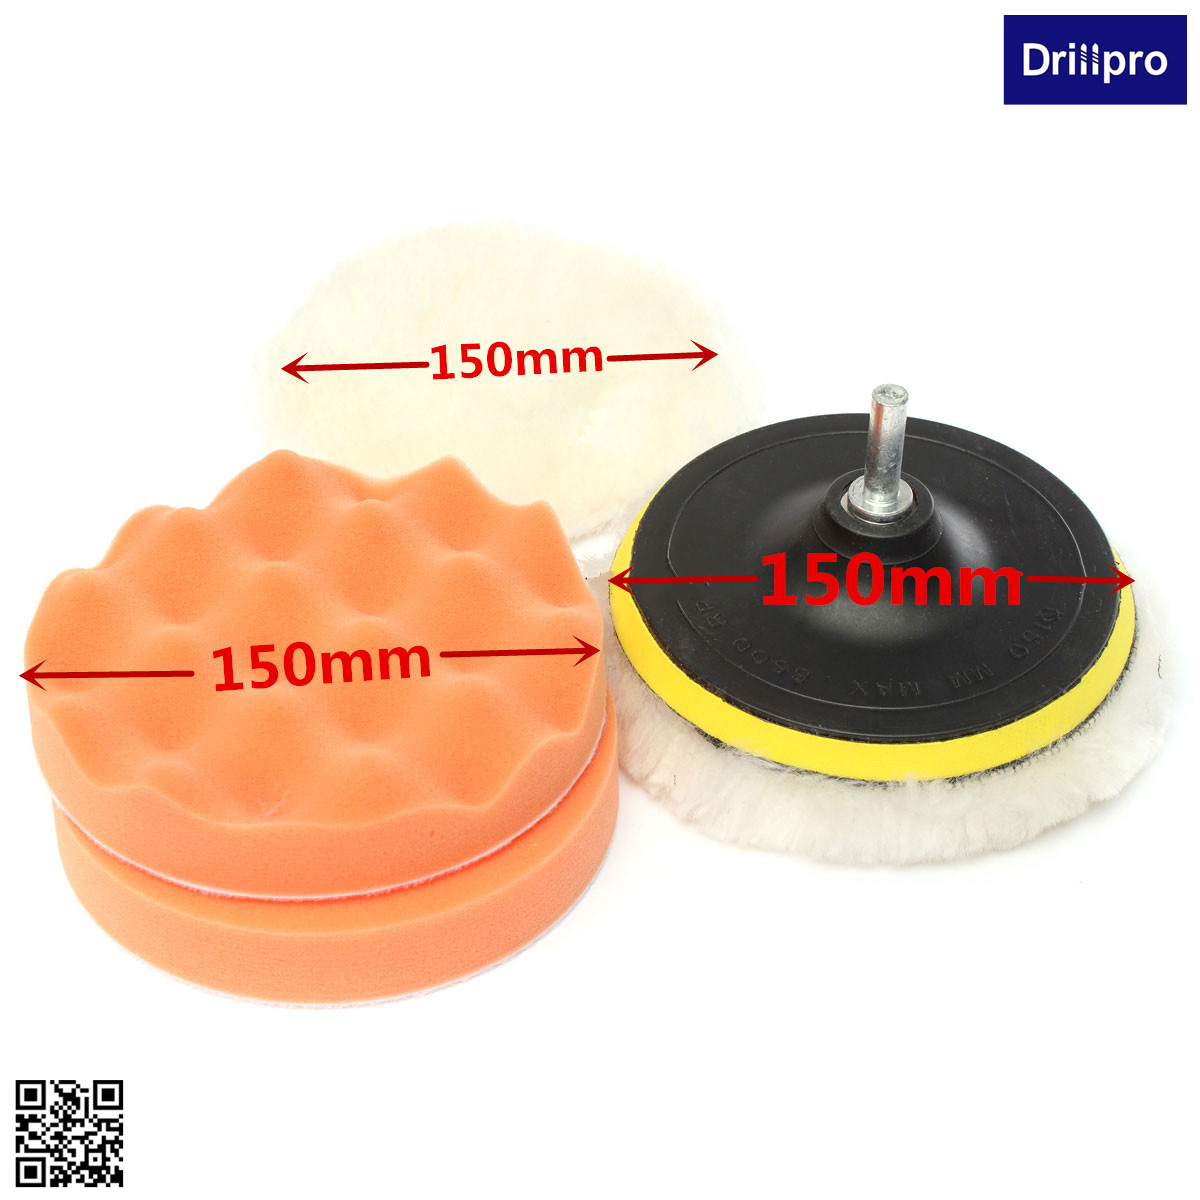 Drillpro 6 Inch(150mm)  Polishing Buffing Pad for Car Polishing with Drill Adapter - M14